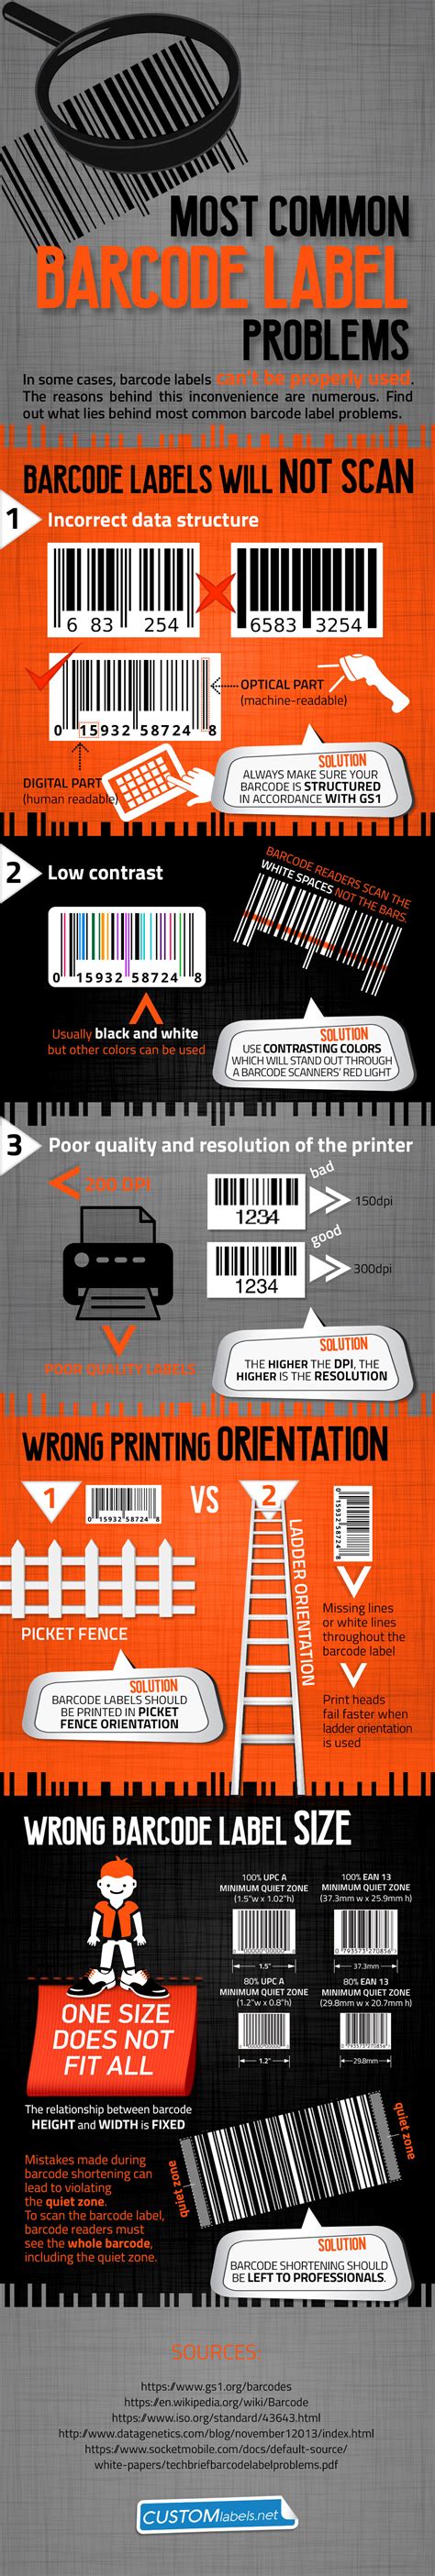 common barcode label problems infographic post